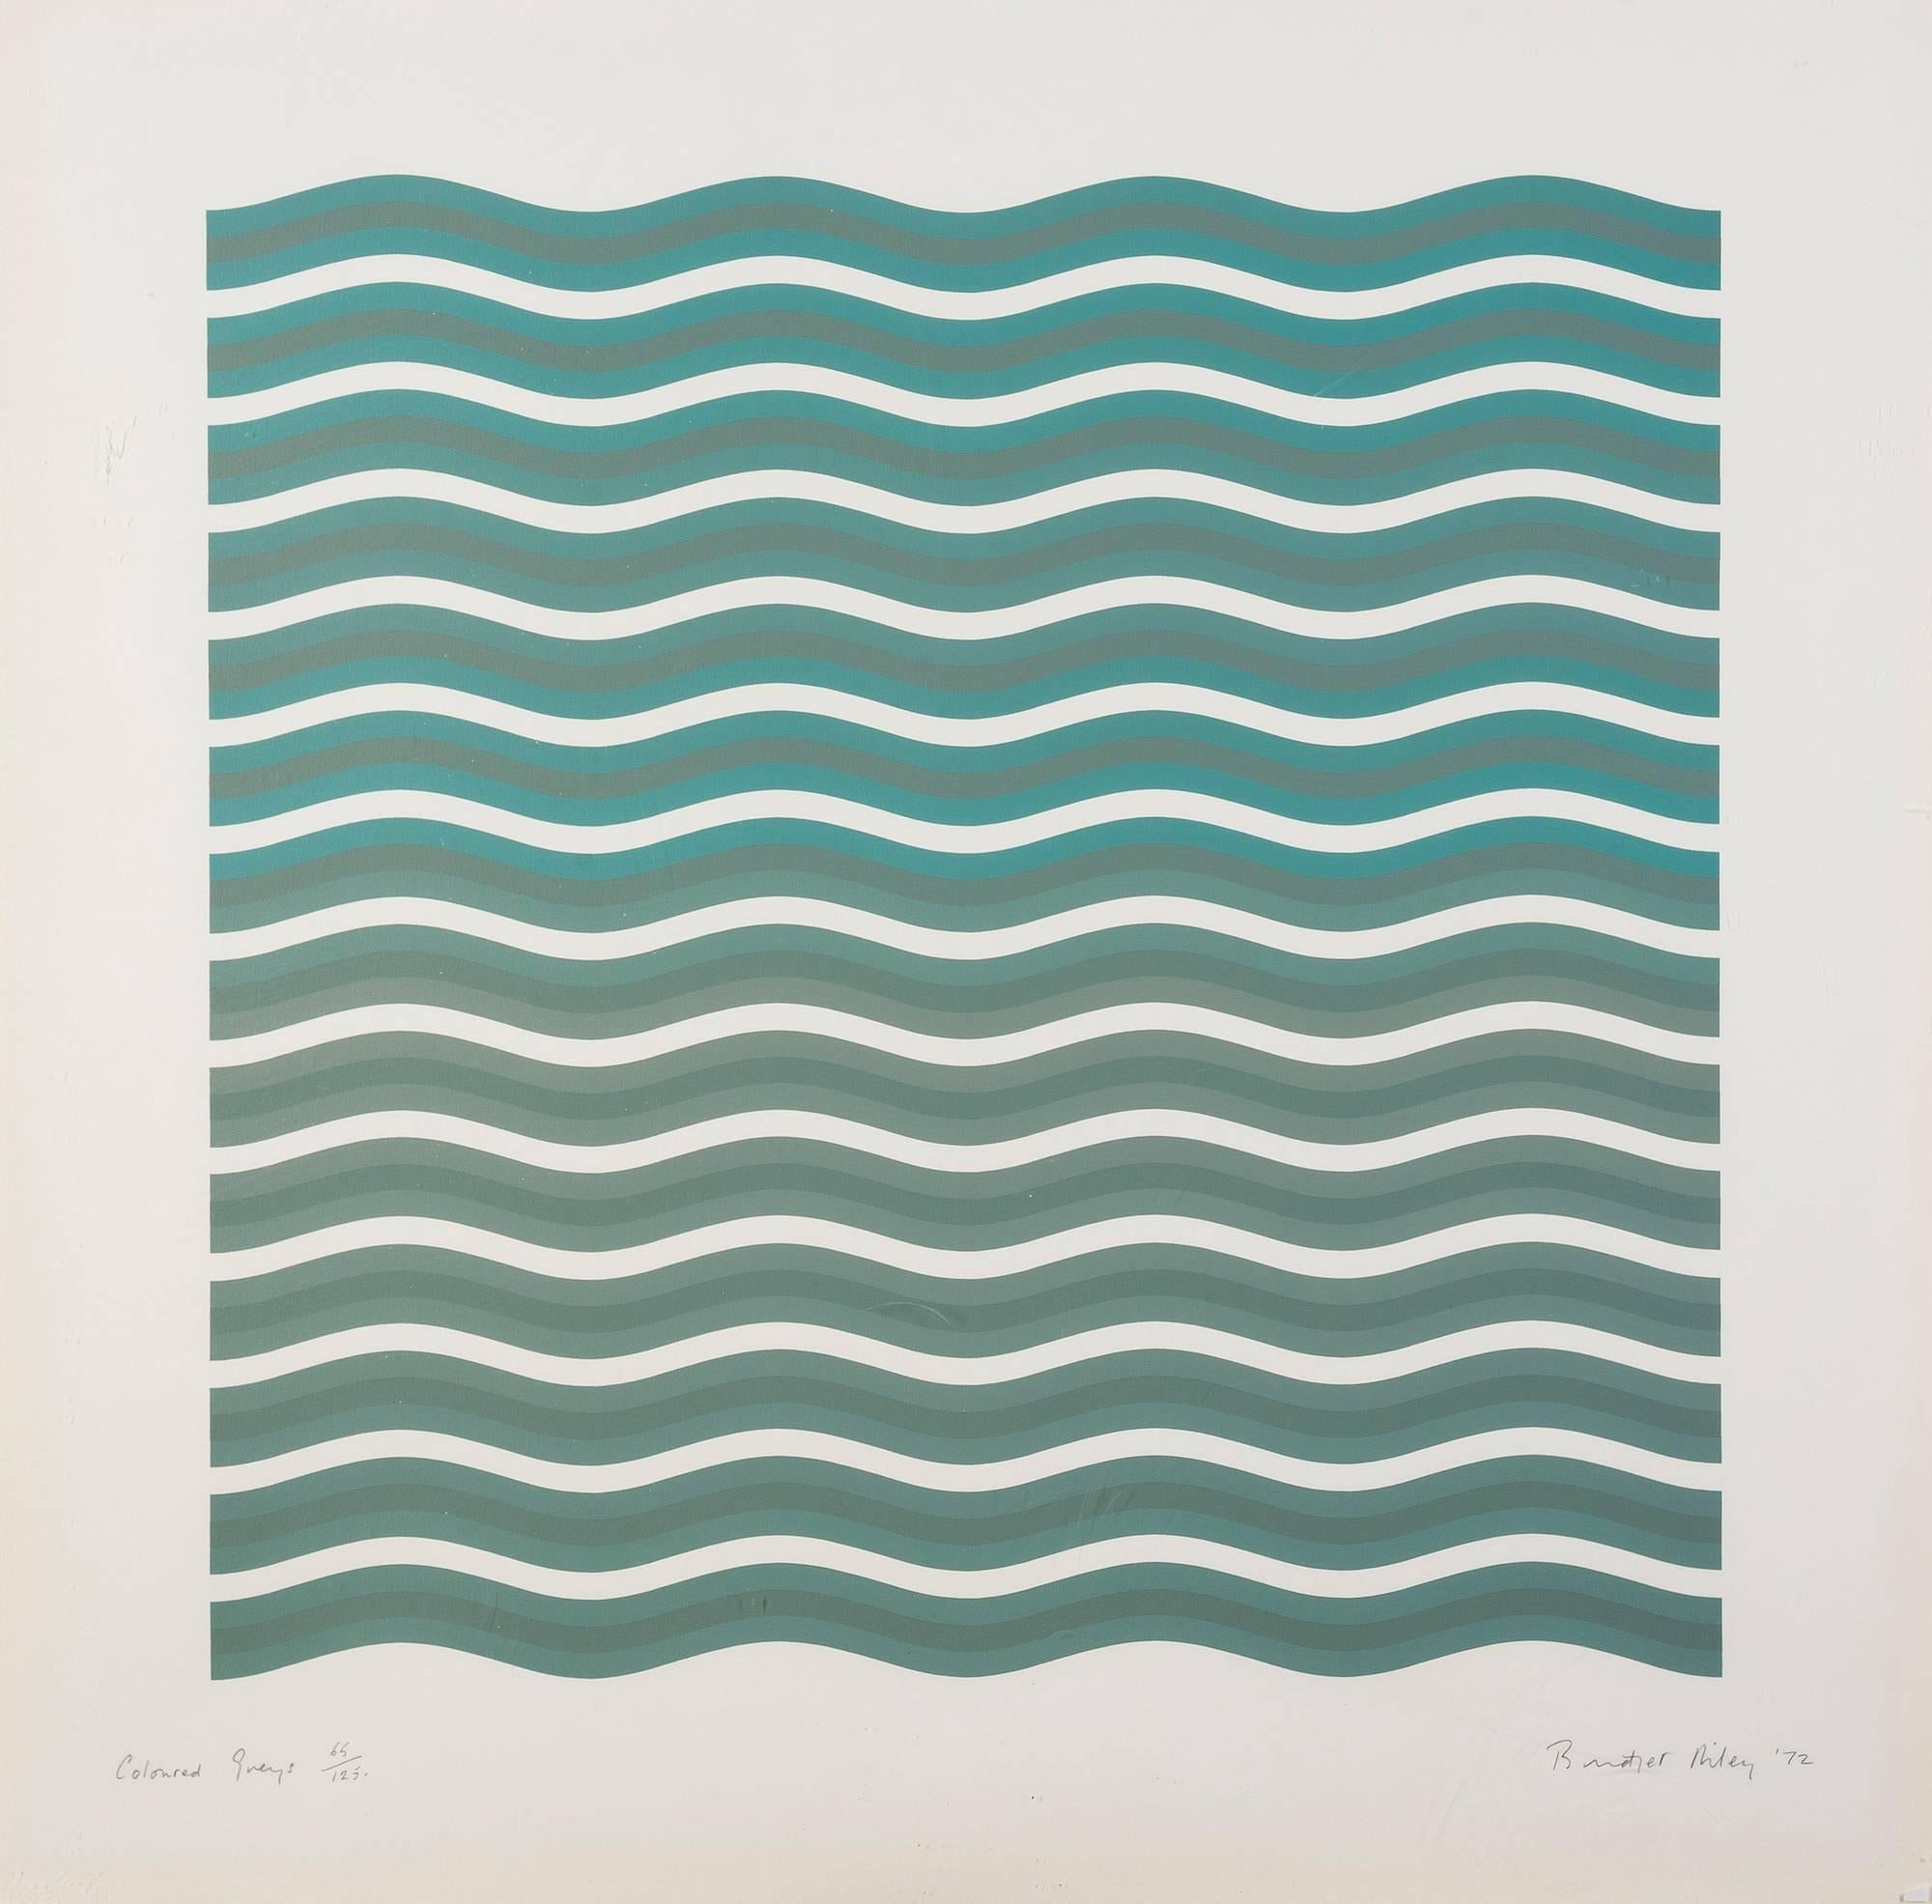 Coloured Greys [2], 1972
Bridget Riley

Screenprint in colours, on wove paper
Signed, titled, dated and numbered from the edition of 125
Printed by Kelpra Studio, London
Image: 56.9 × 57.2 cm (22.4 × 22.5 in)
Sheet: 72.6 × 73.4 cm (28.6 × 28.9